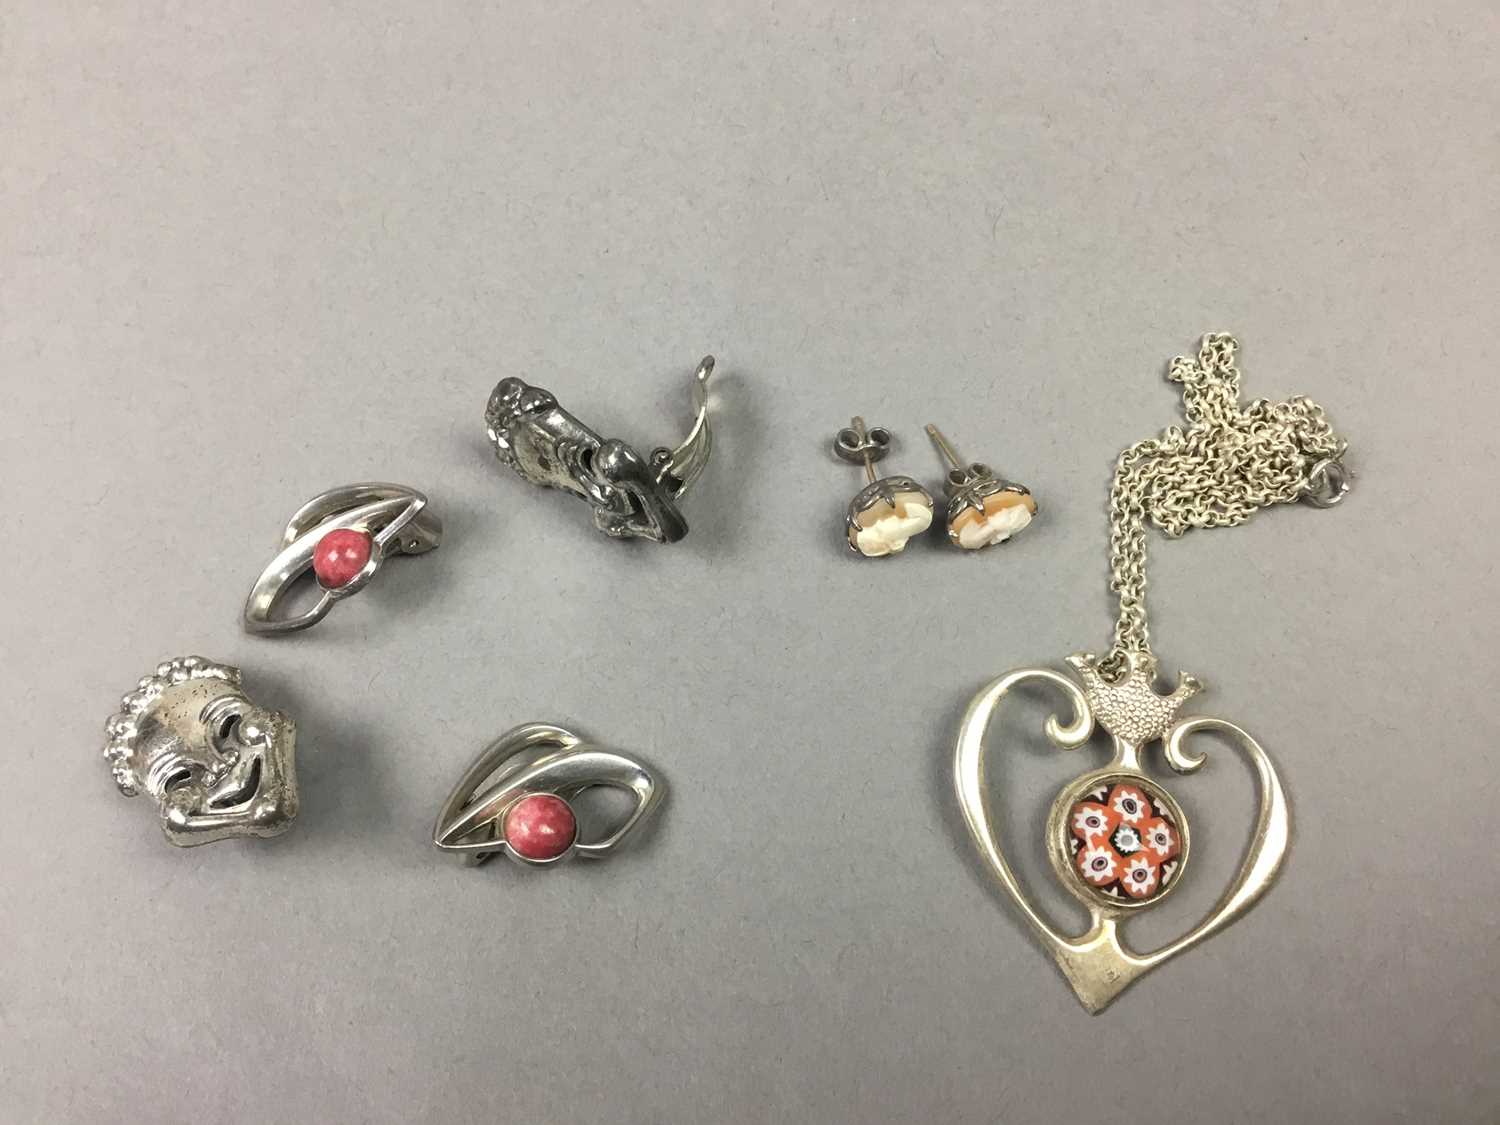 TWO SILVER AND MILLEFIORI PENDANTS, ALONG WITH THREE PAIRS OF EARRINGS - Image 2 of 2